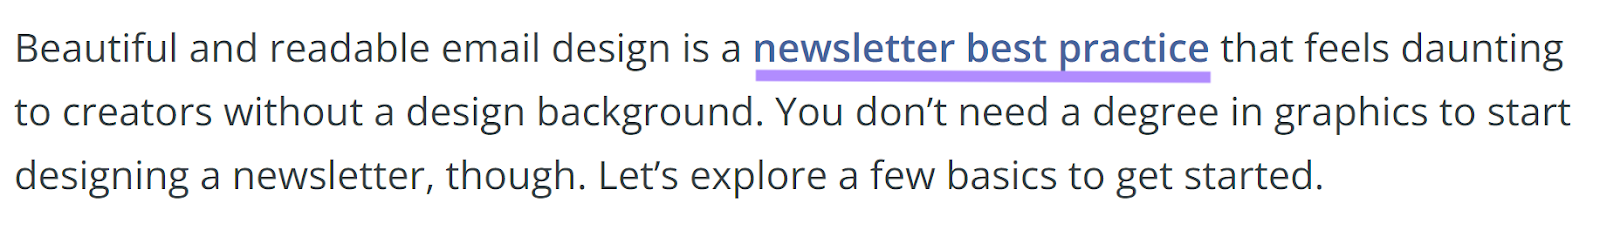 Anchor text of “newsletter best practice” from ConvertKit